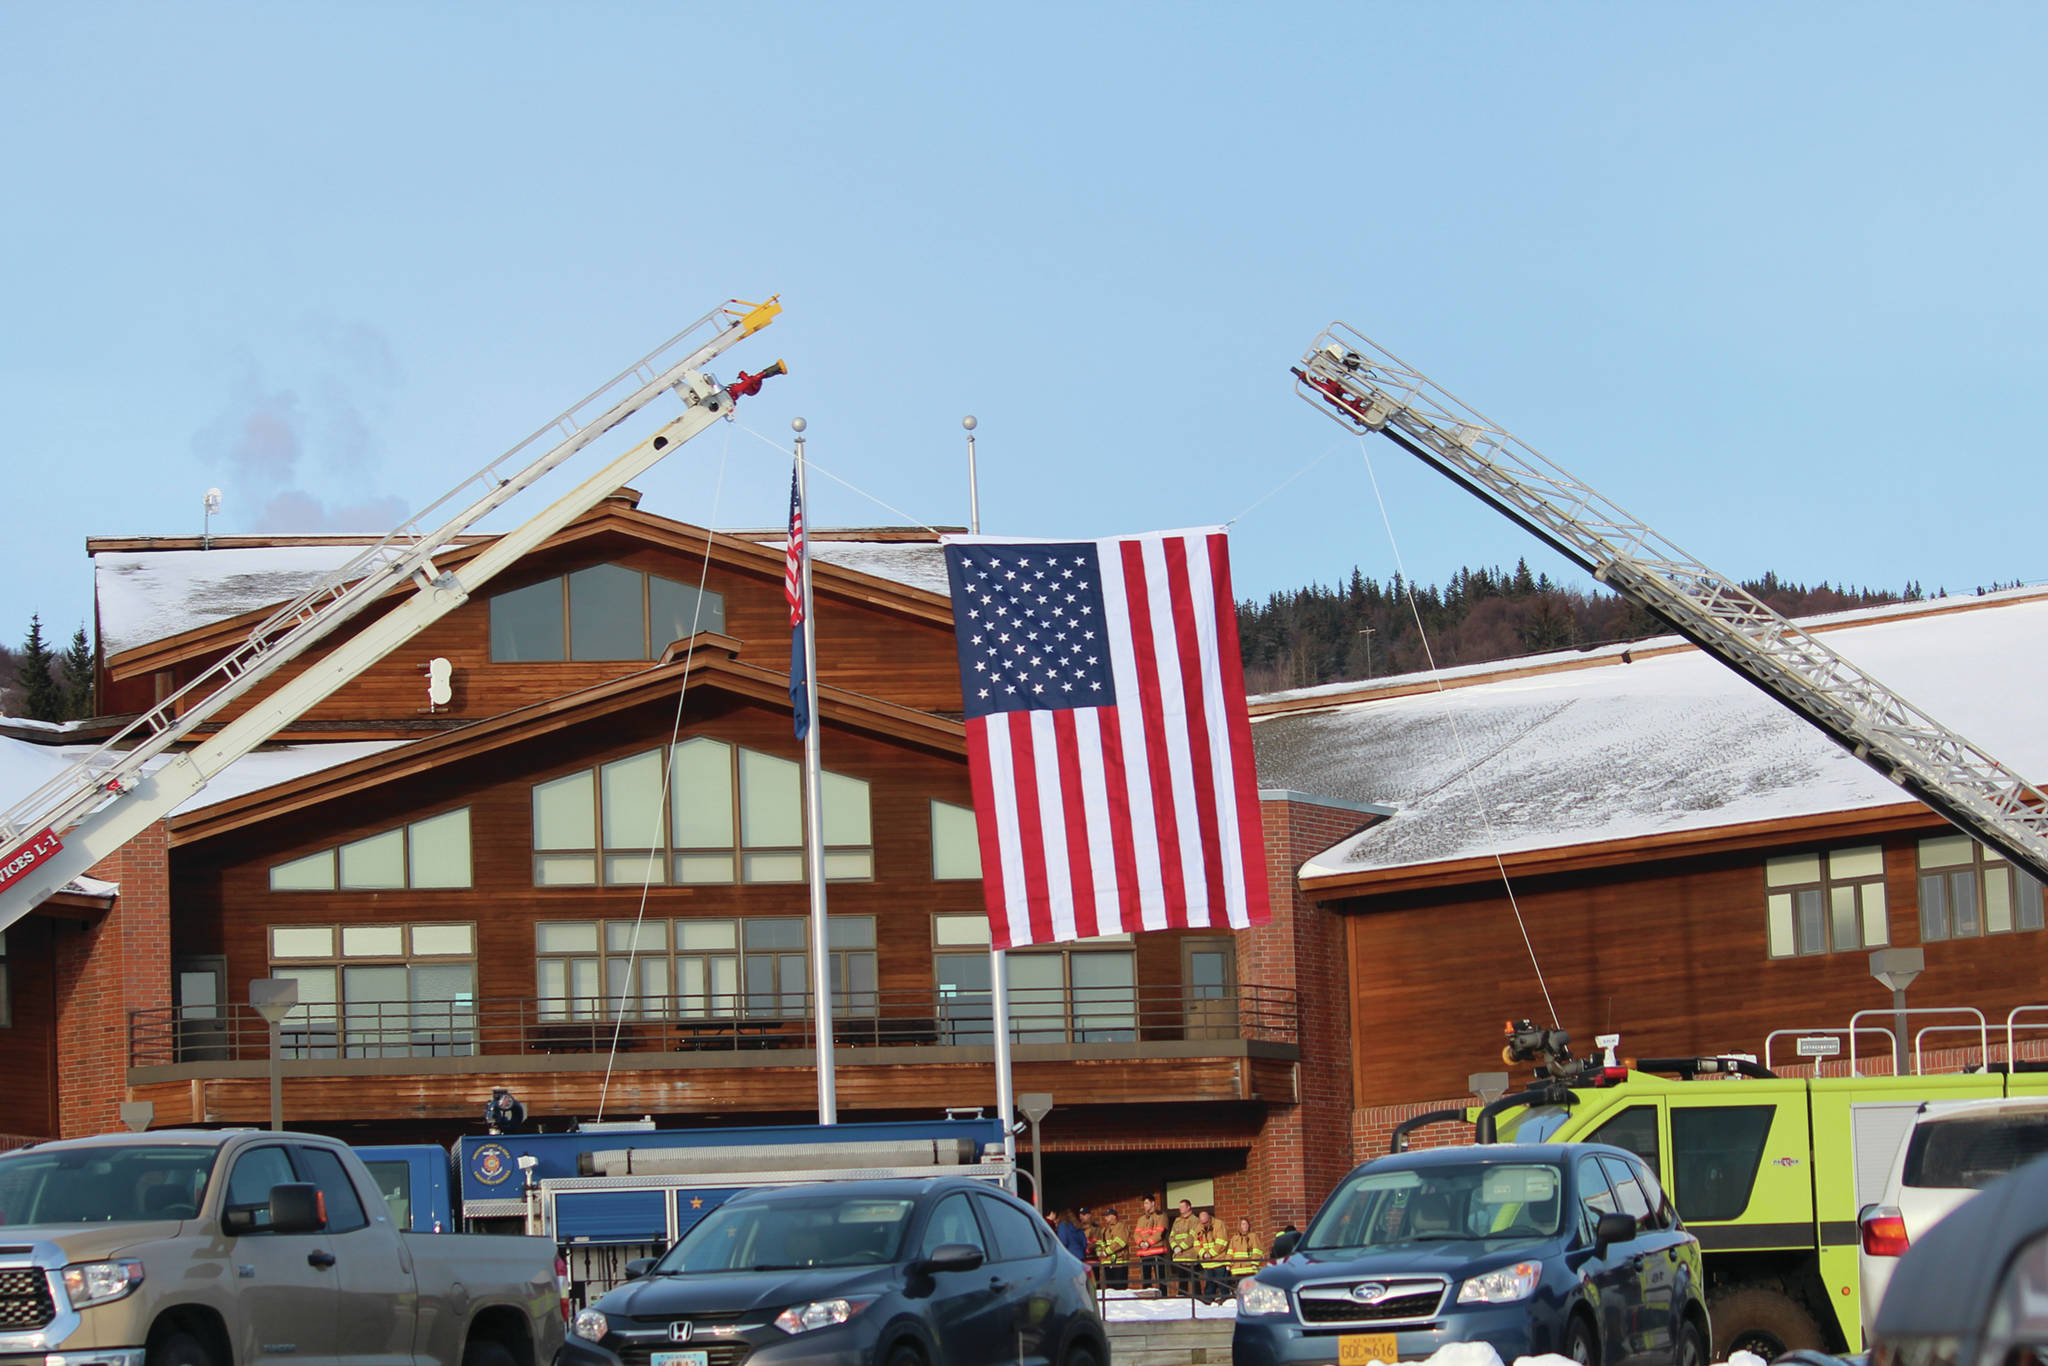 An American flag is suspended between two ladder trucks outside Homer High School for the memorial for Gary Thomas, a Homer man who was killed in a water heater explosion this month, on Sunday, Jan. 19, 2020 in Homer, Alaska. Thomas was a volunteer firefighter for more than 40 years. (Photo by Megan Pacer/Homer News)